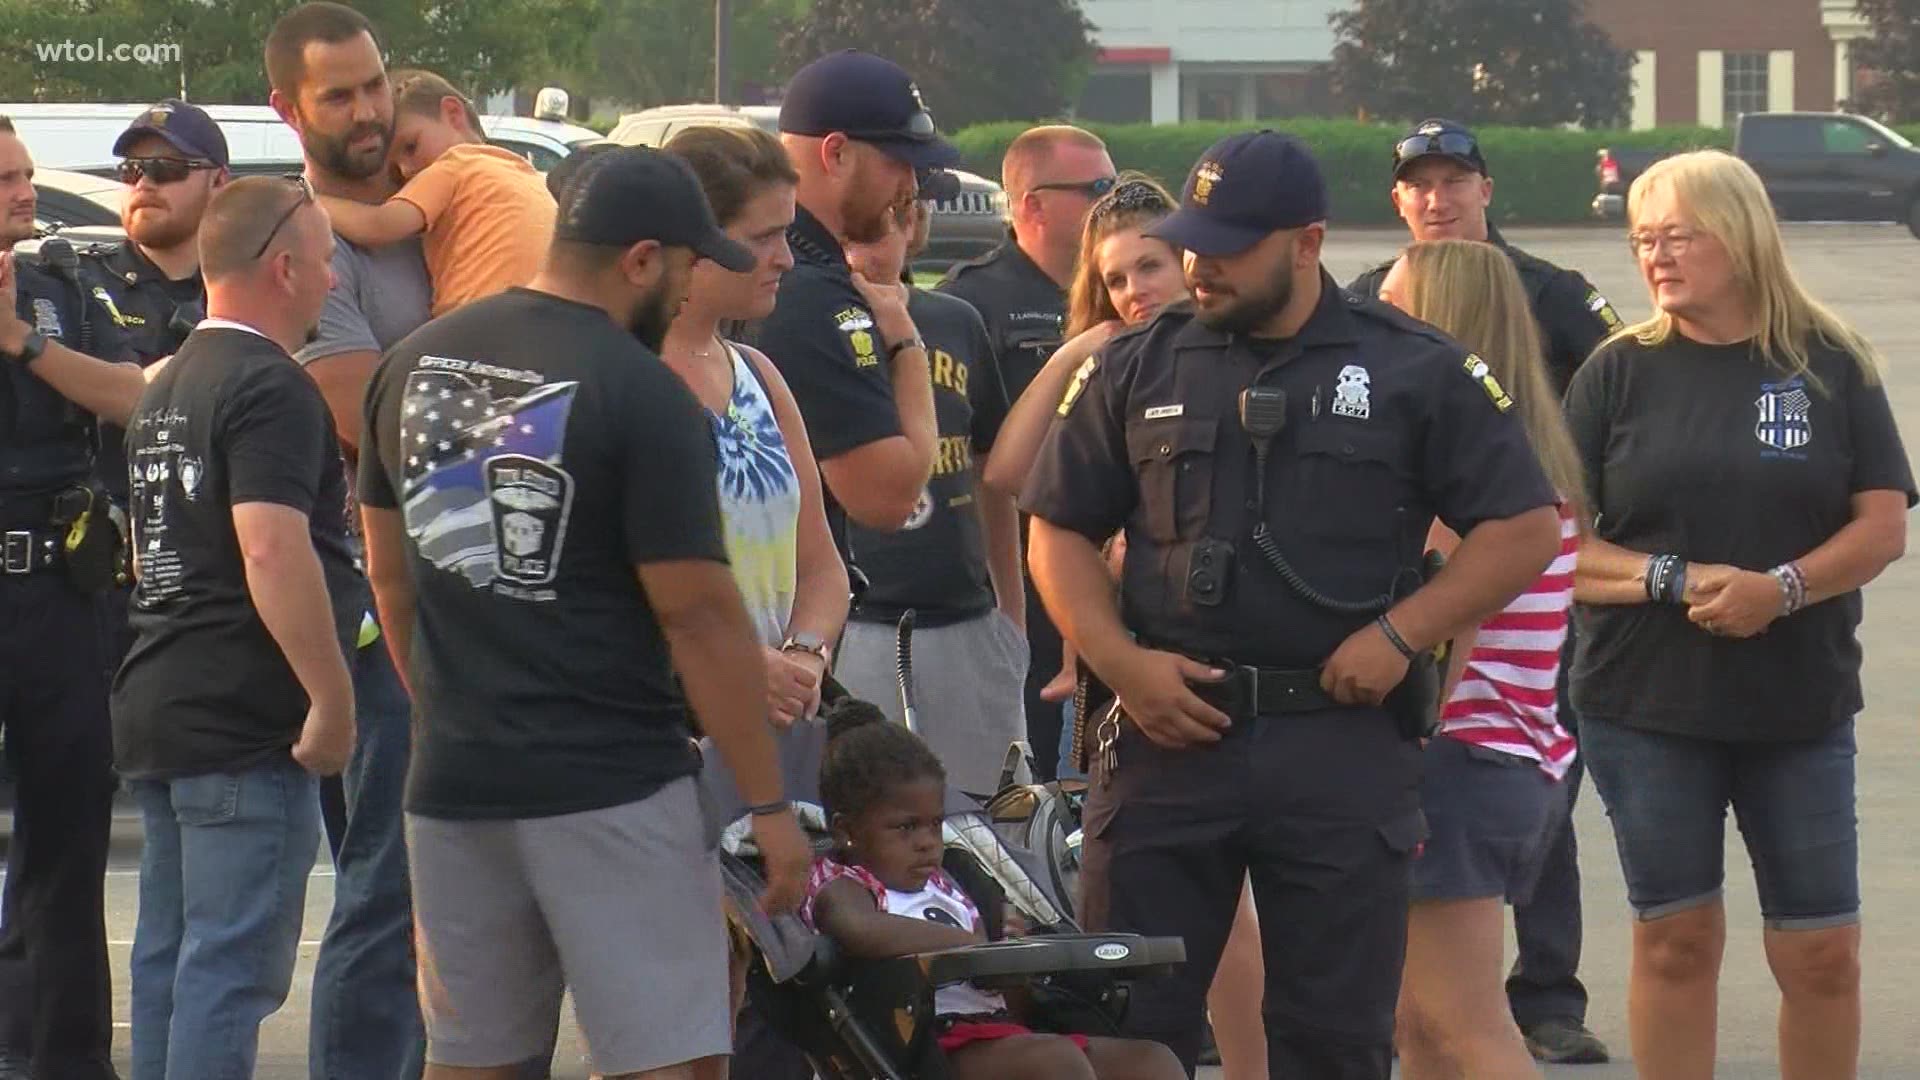 On Sunday, a large group of people gathered at the Home Depot off Alexis Road where Officer Dia responded to his last call.